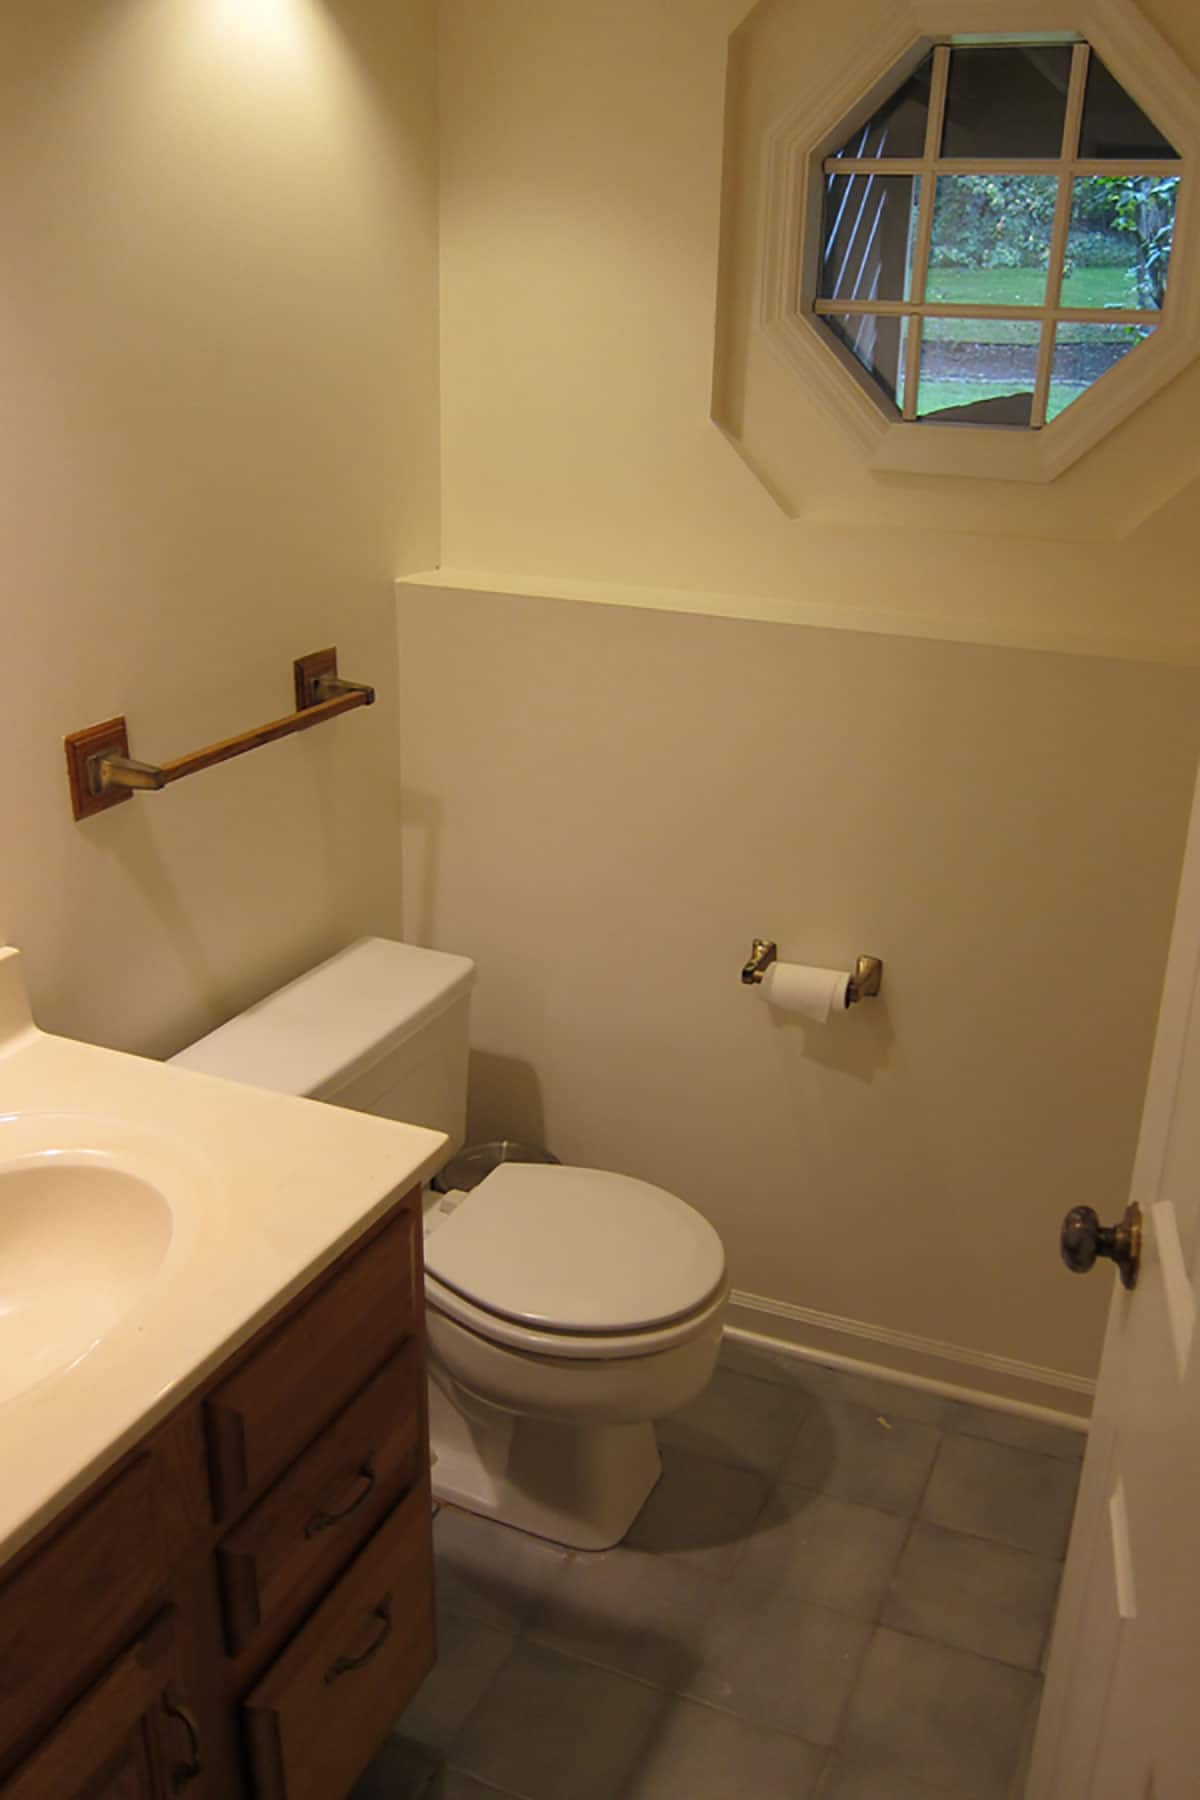 Black and White Bathroom Renovation Before and After - A before look at the outdated boring bathroom in our basement